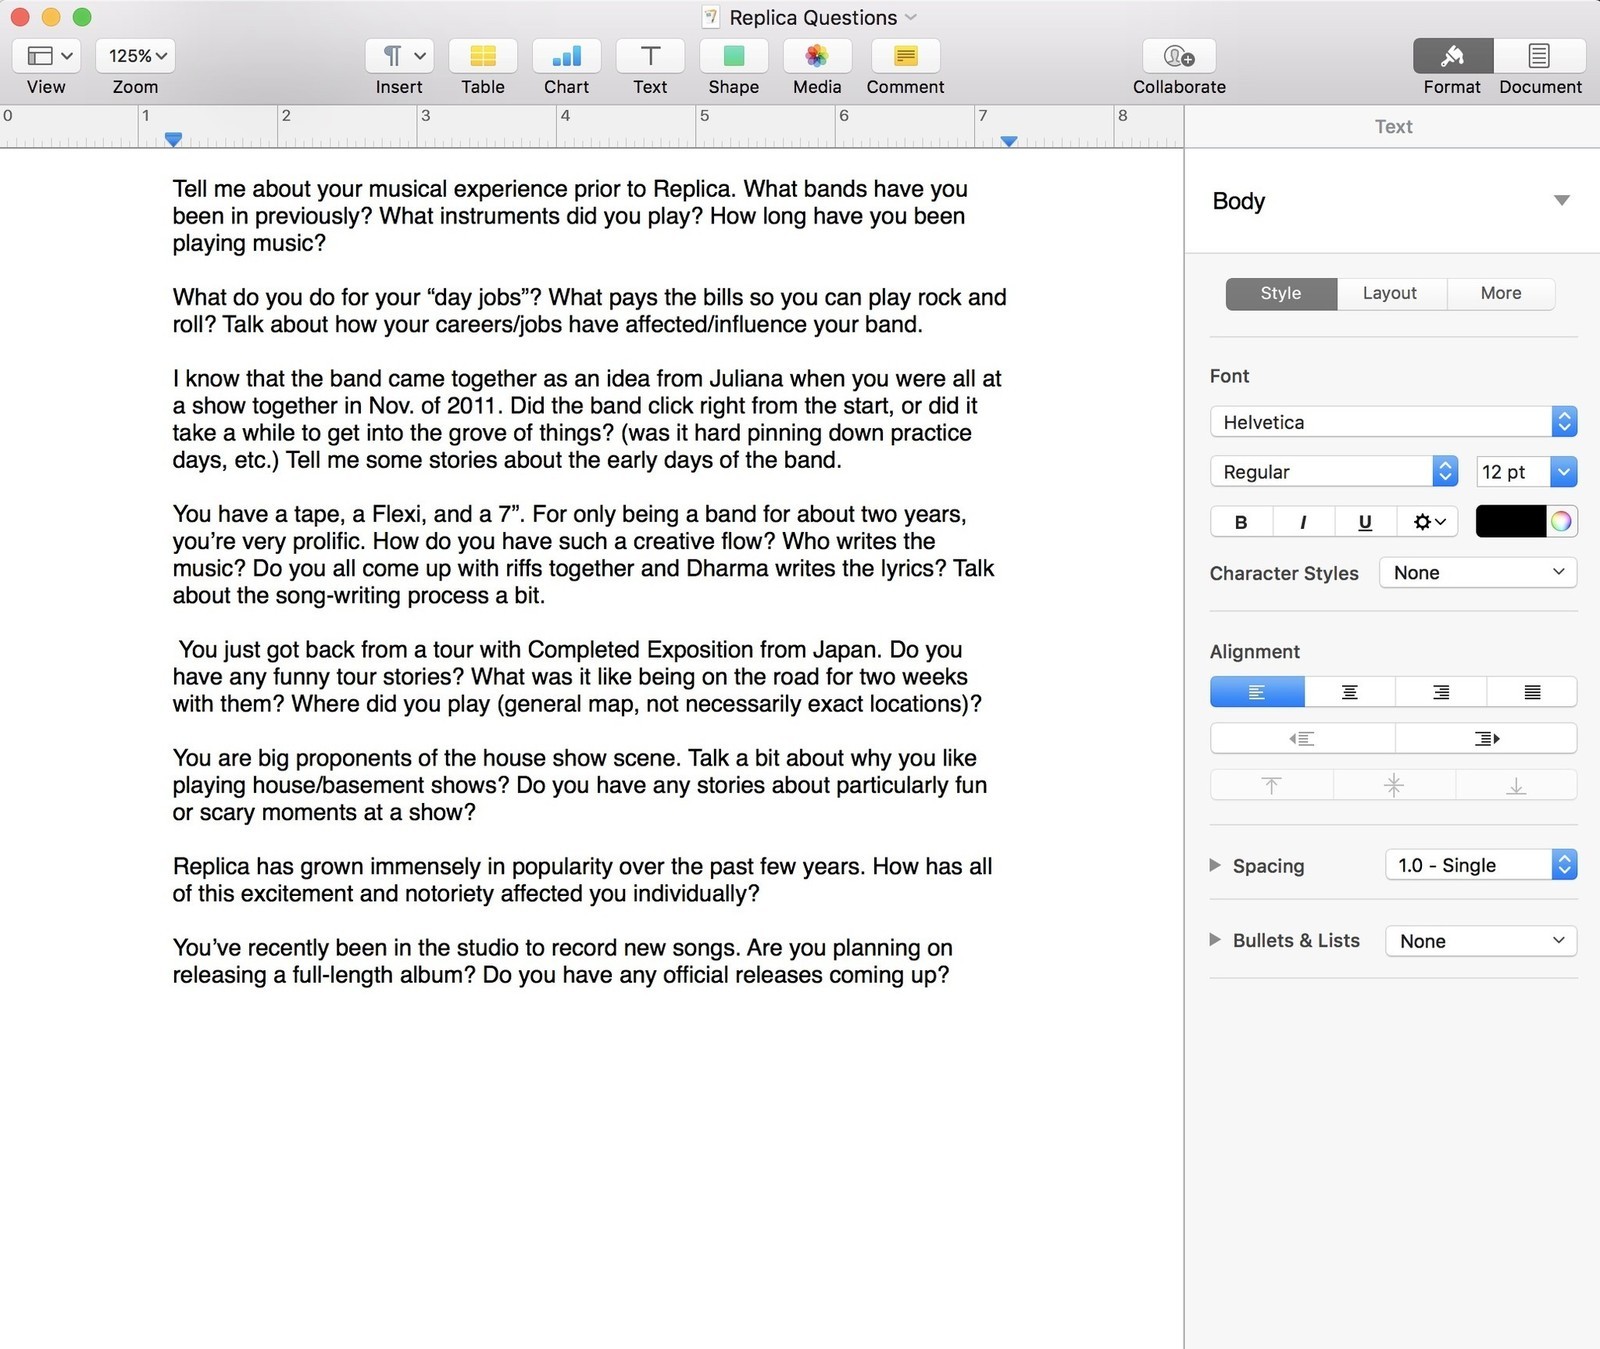 where to get microsoft word for mac